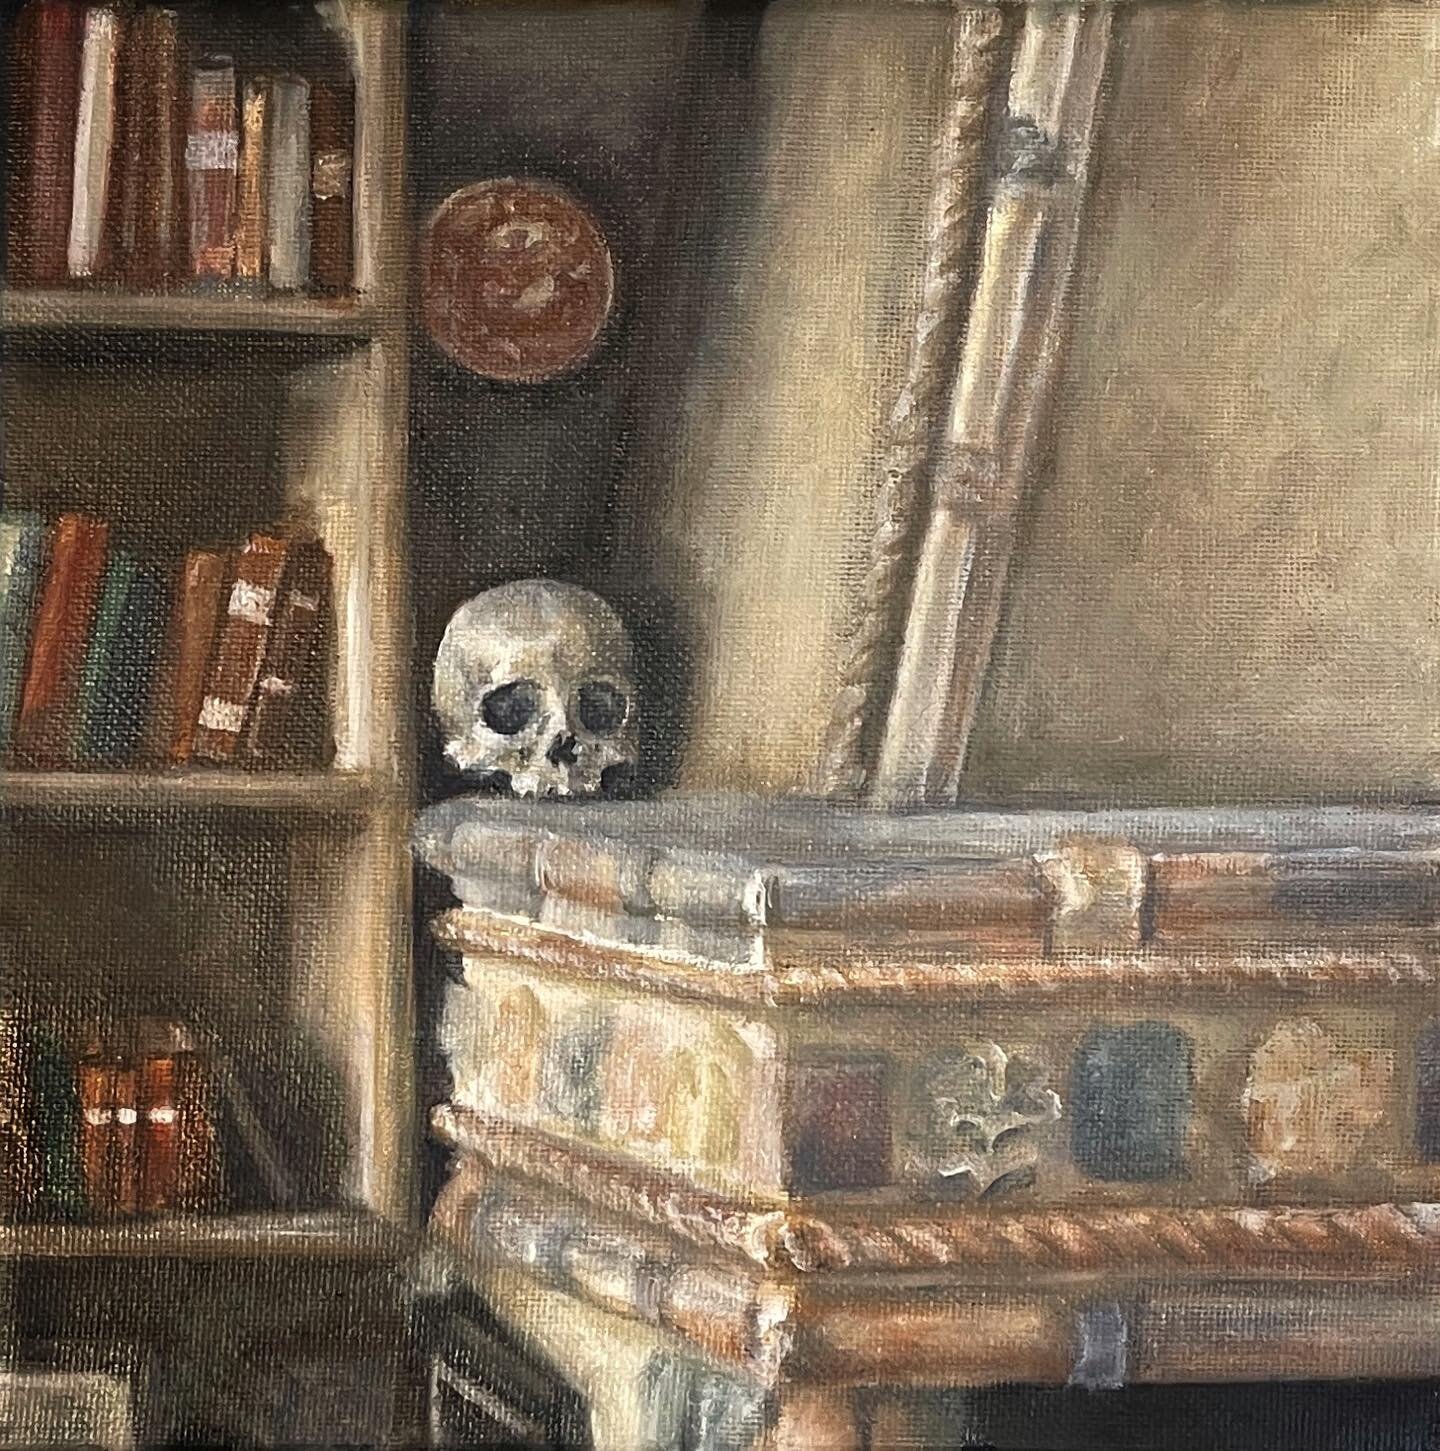 &ldquo;Fonthill Vanitas&rdquo;, 2022, 8&rdquo; x 8&rdquo;, oil on canvas 

Thrilled to include something a little different in @midnightgallerypa &lsquo;s Halloween Pop Up show! The reception is on Oct 22nd 4PM - 9:30 PM 💀🖤 

#oilpainting #mementom